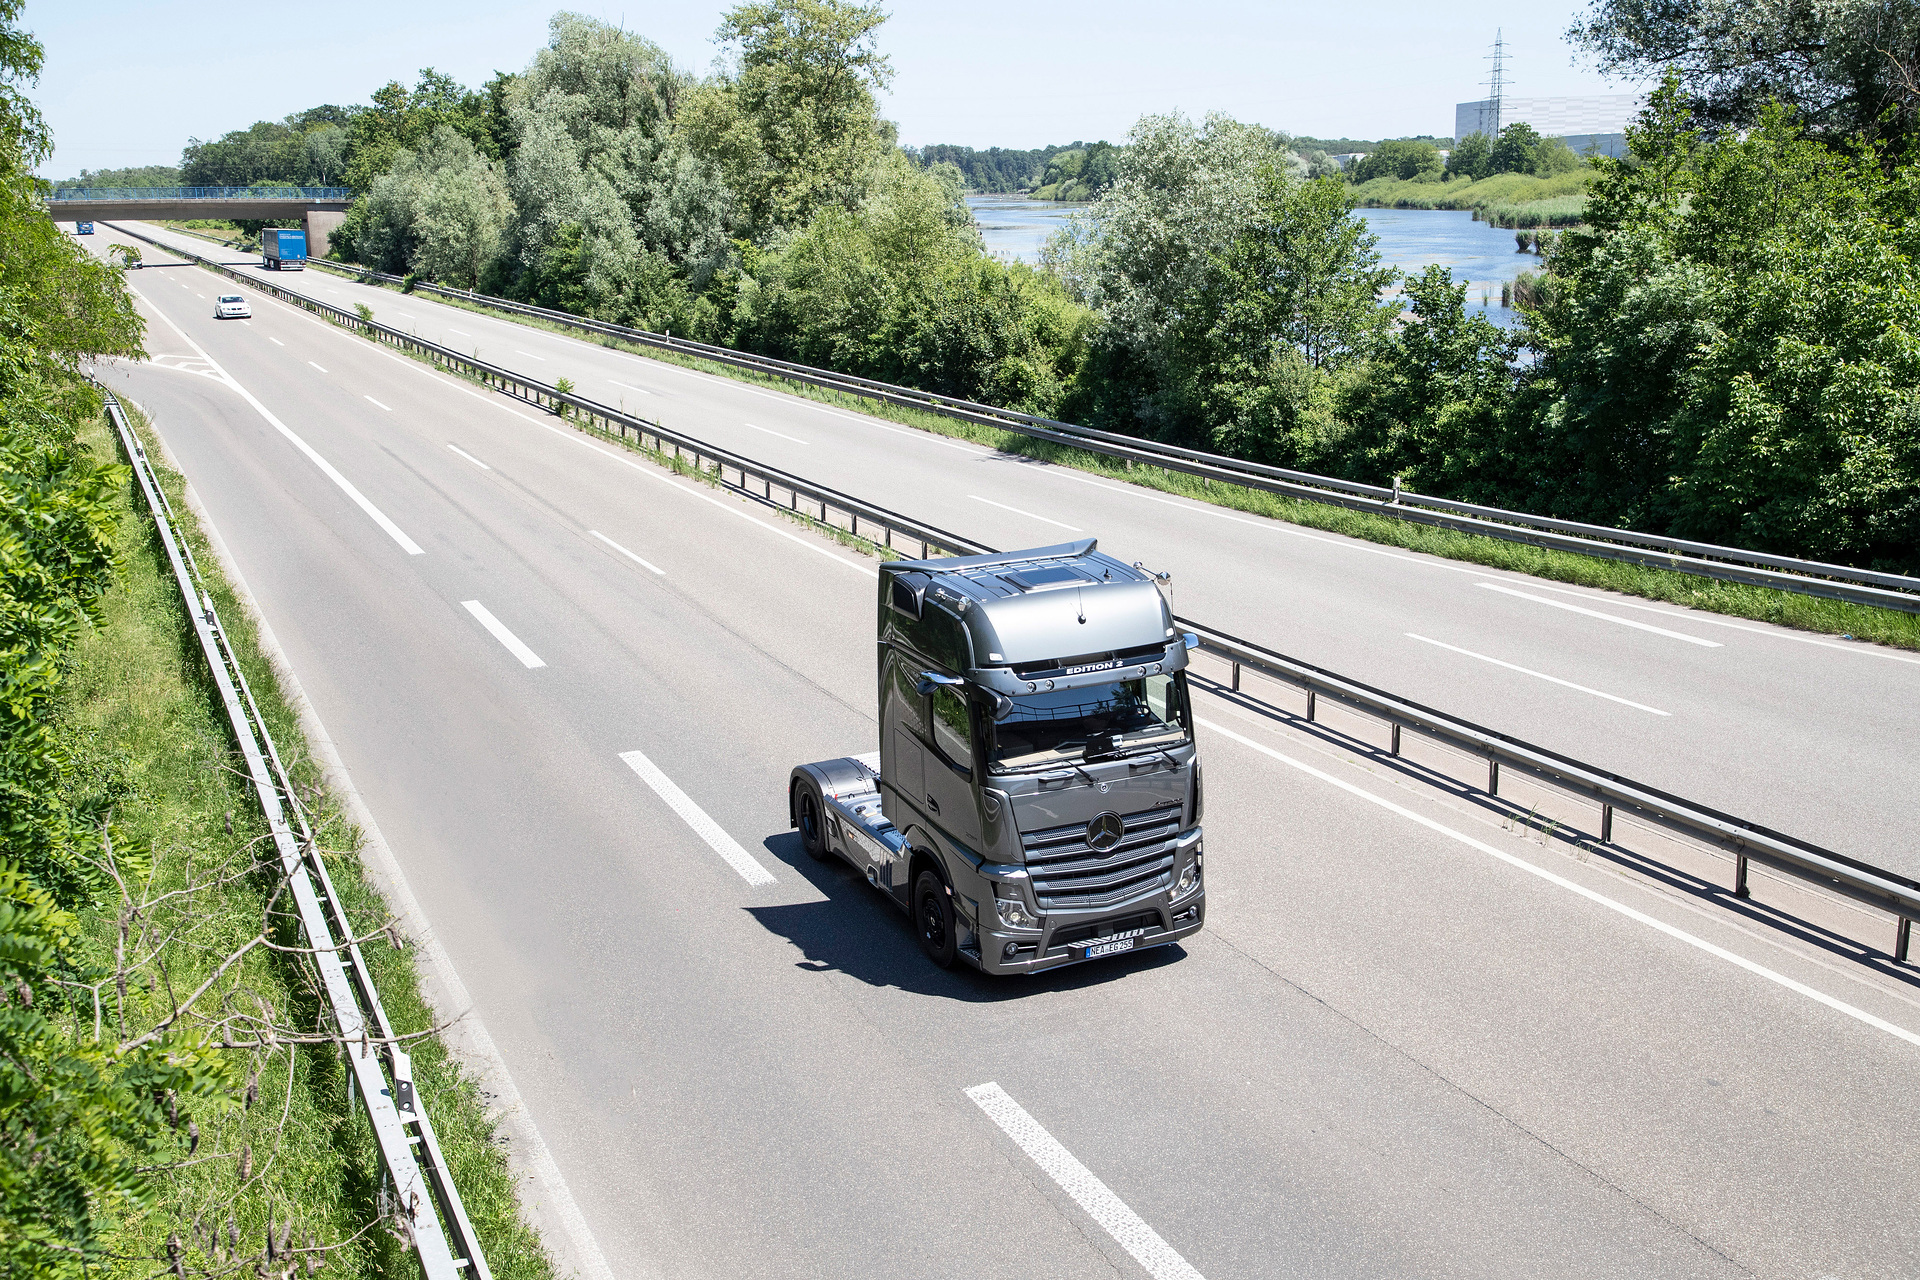 Actros Edition 2 special model: Tobias Wöllmer has collected his dream truck from the plant at Wörth